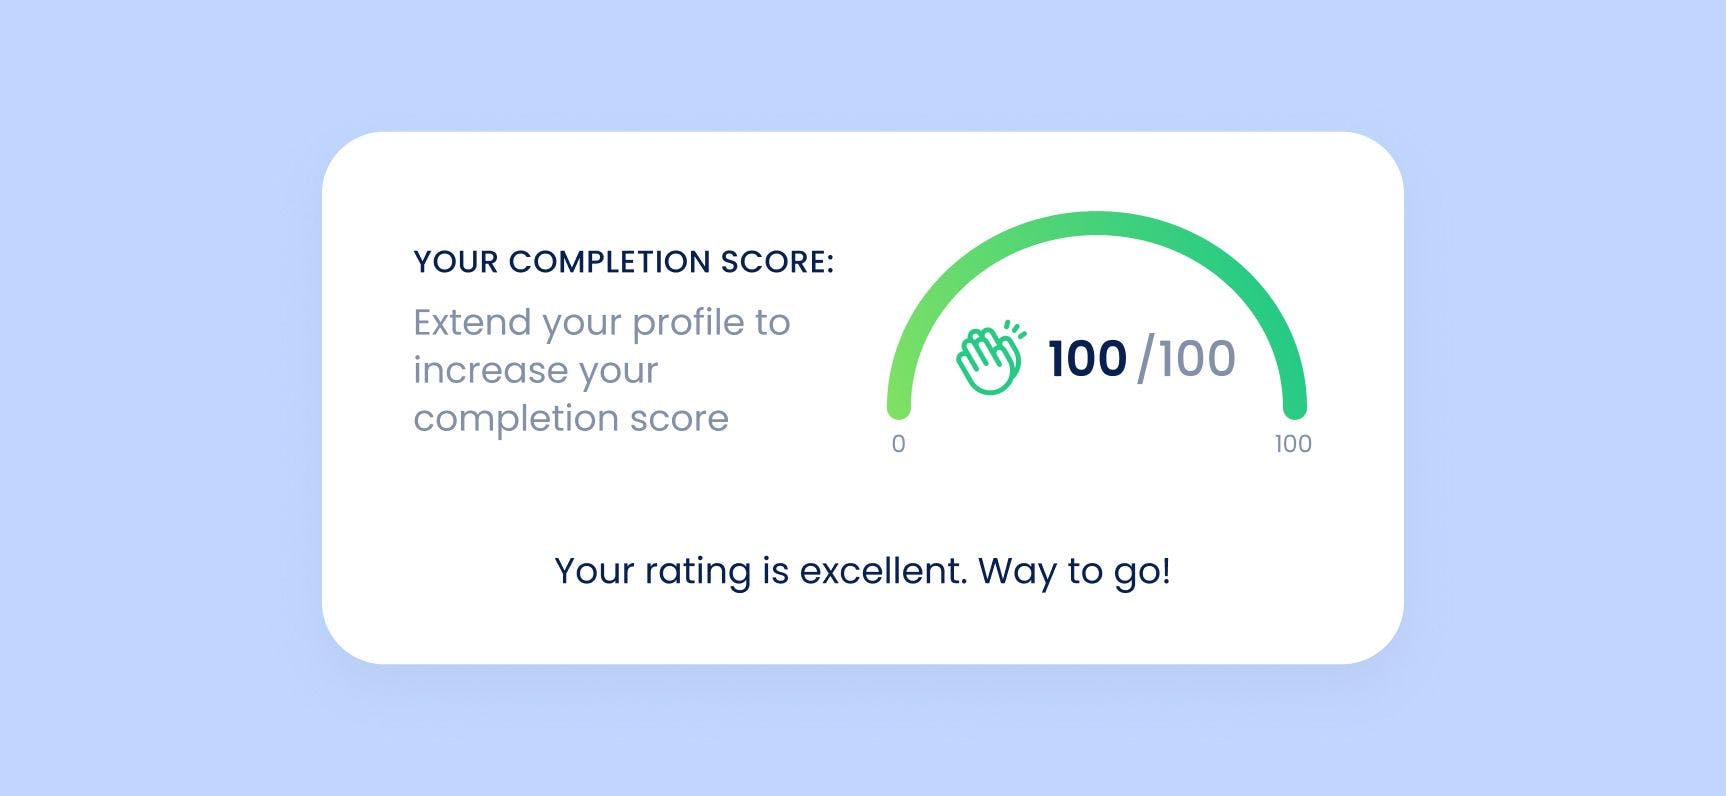 Get excellent rating on your completion score with Crewlinker